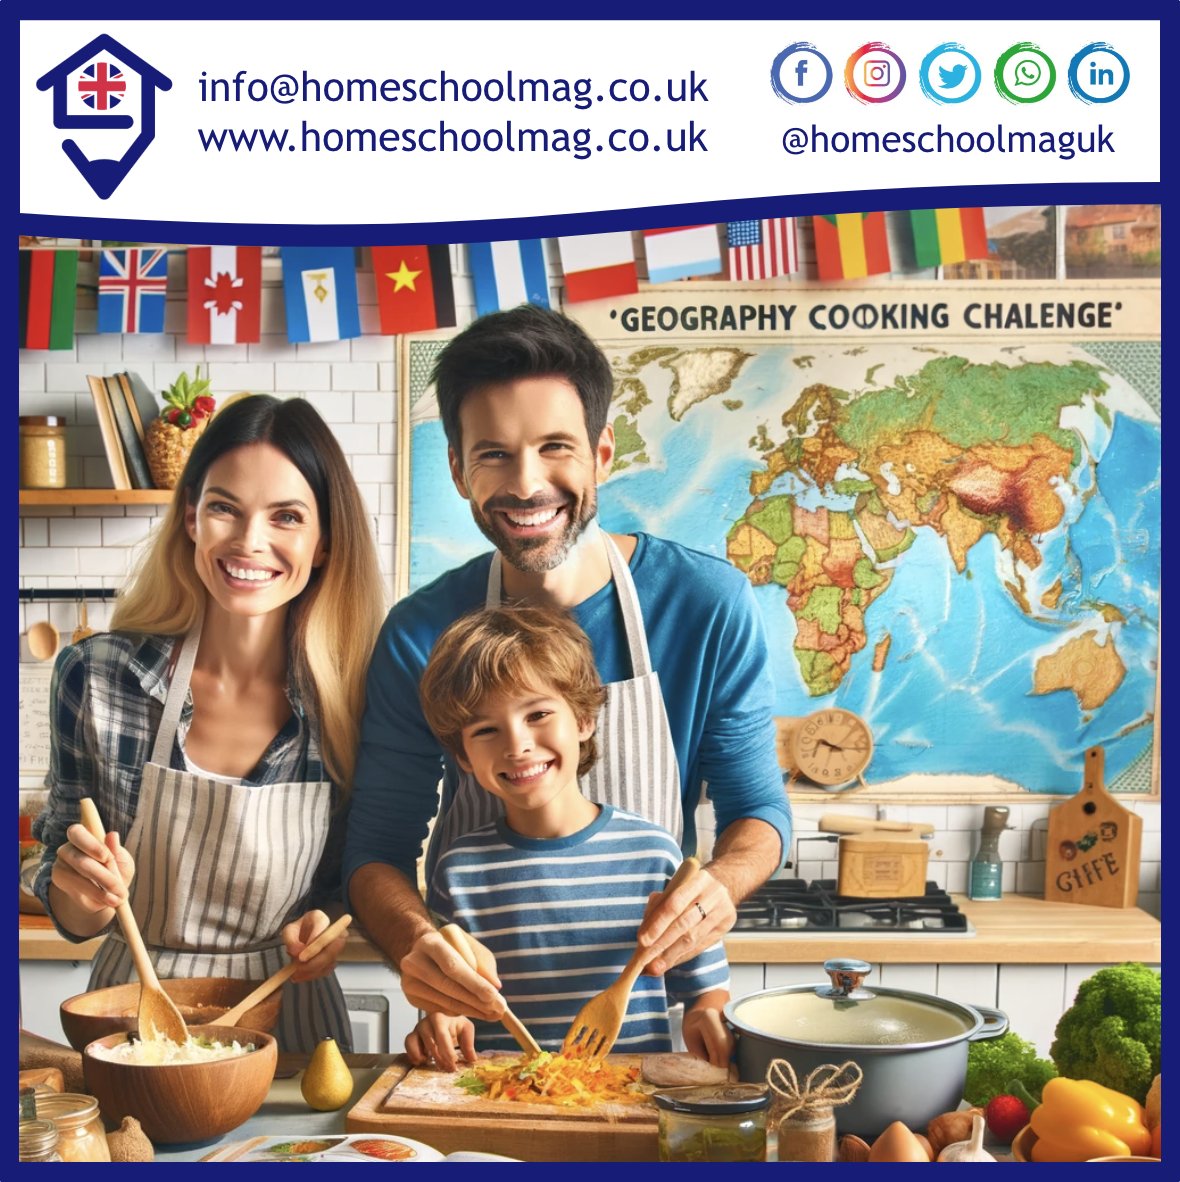 🎉🌍 #FridayFun: Geography Cooking Challenge! 🍳🌏

Home-schoolers, let's cook a dish from a different country! Learn about its geography, history, and culture while enjoying delicious food. Share your culinary journey and insights! 🥘📚

#HomeSchooling #WorldCuisine 🌟👩‍🍳👨‍🍳